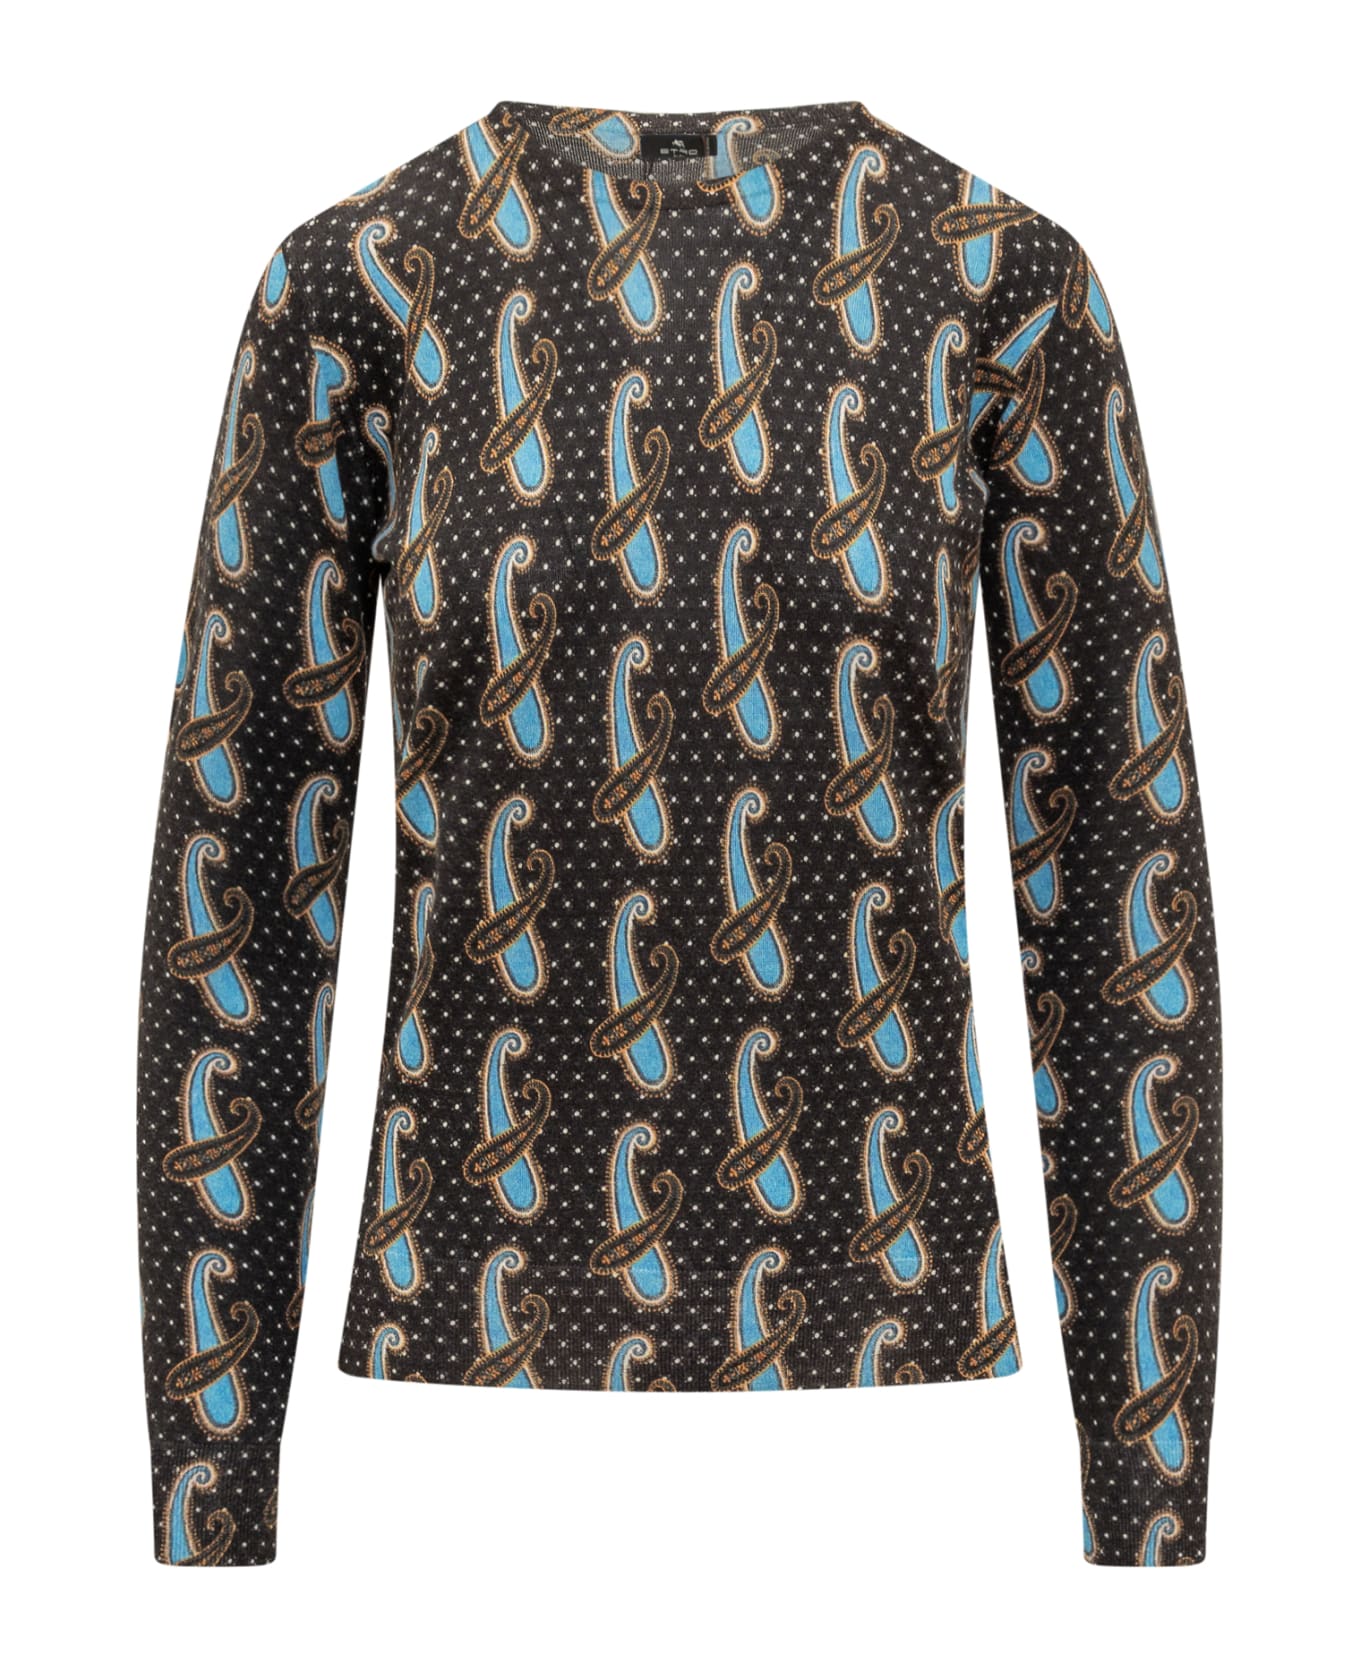 Etro Silk And Cashmere Sweater With Light Blue Paisley Pattern All-over - Blue ニットウェア